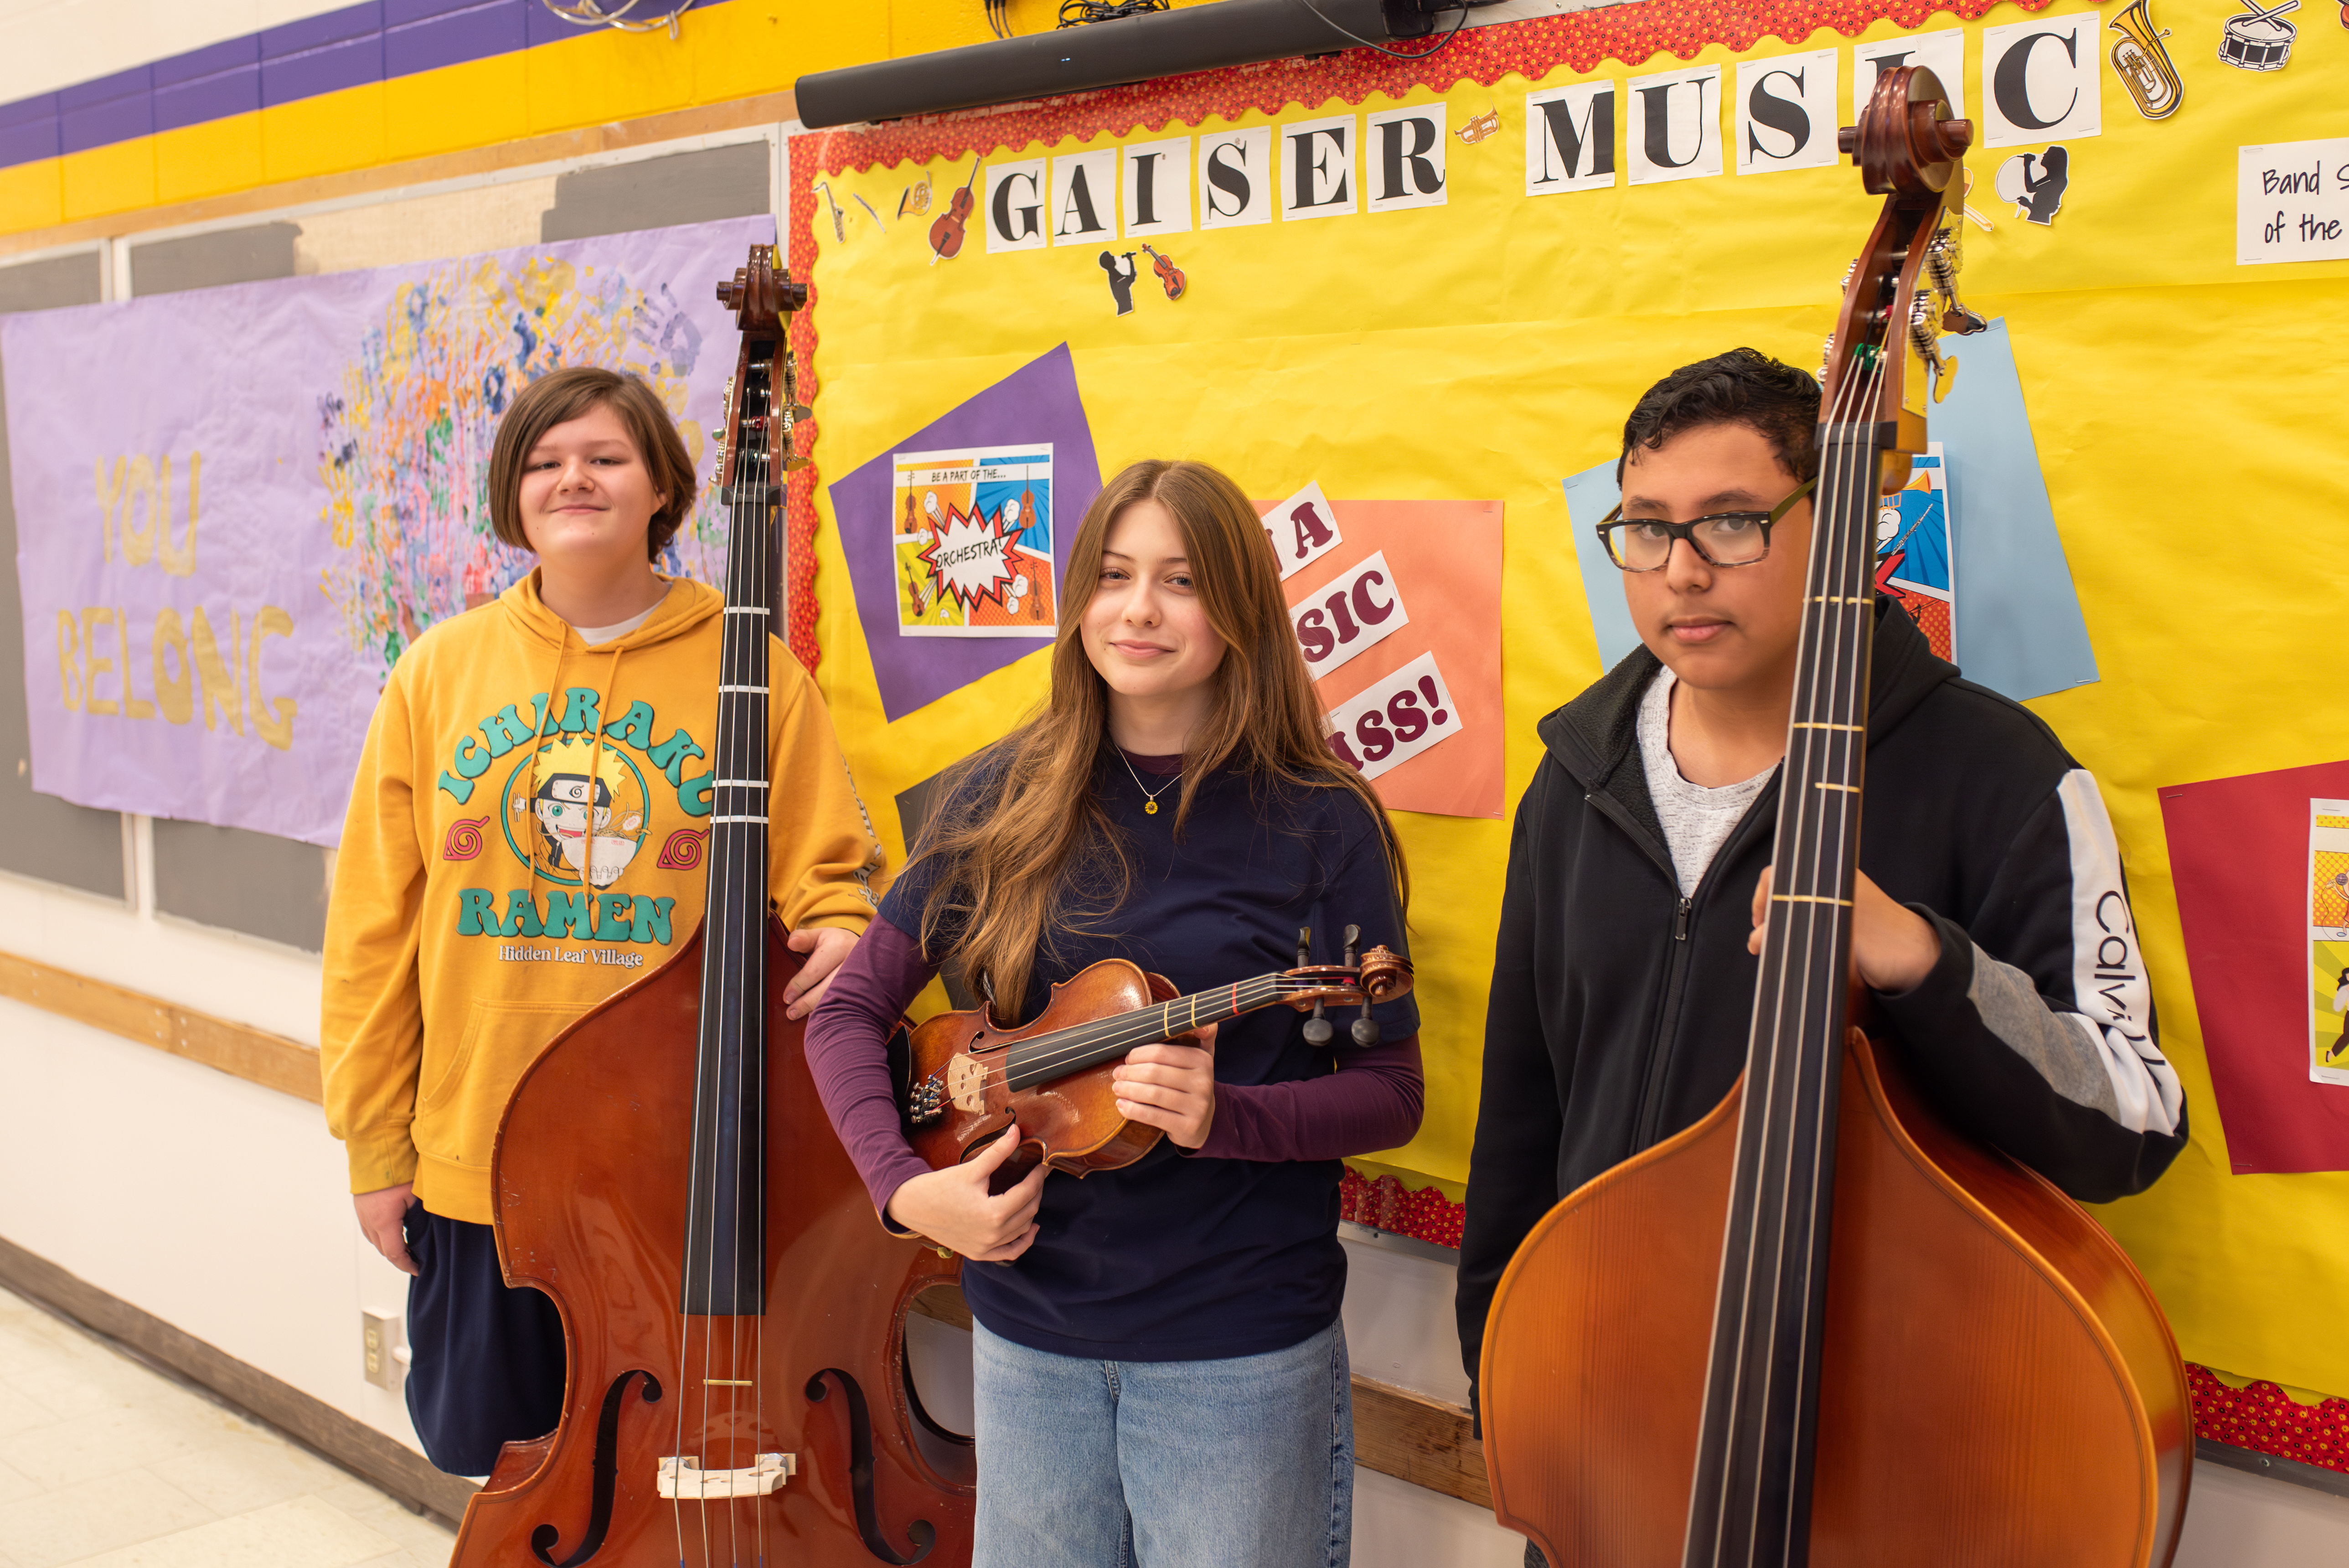 Three students from Gaiser Middle School pose with their instruments.